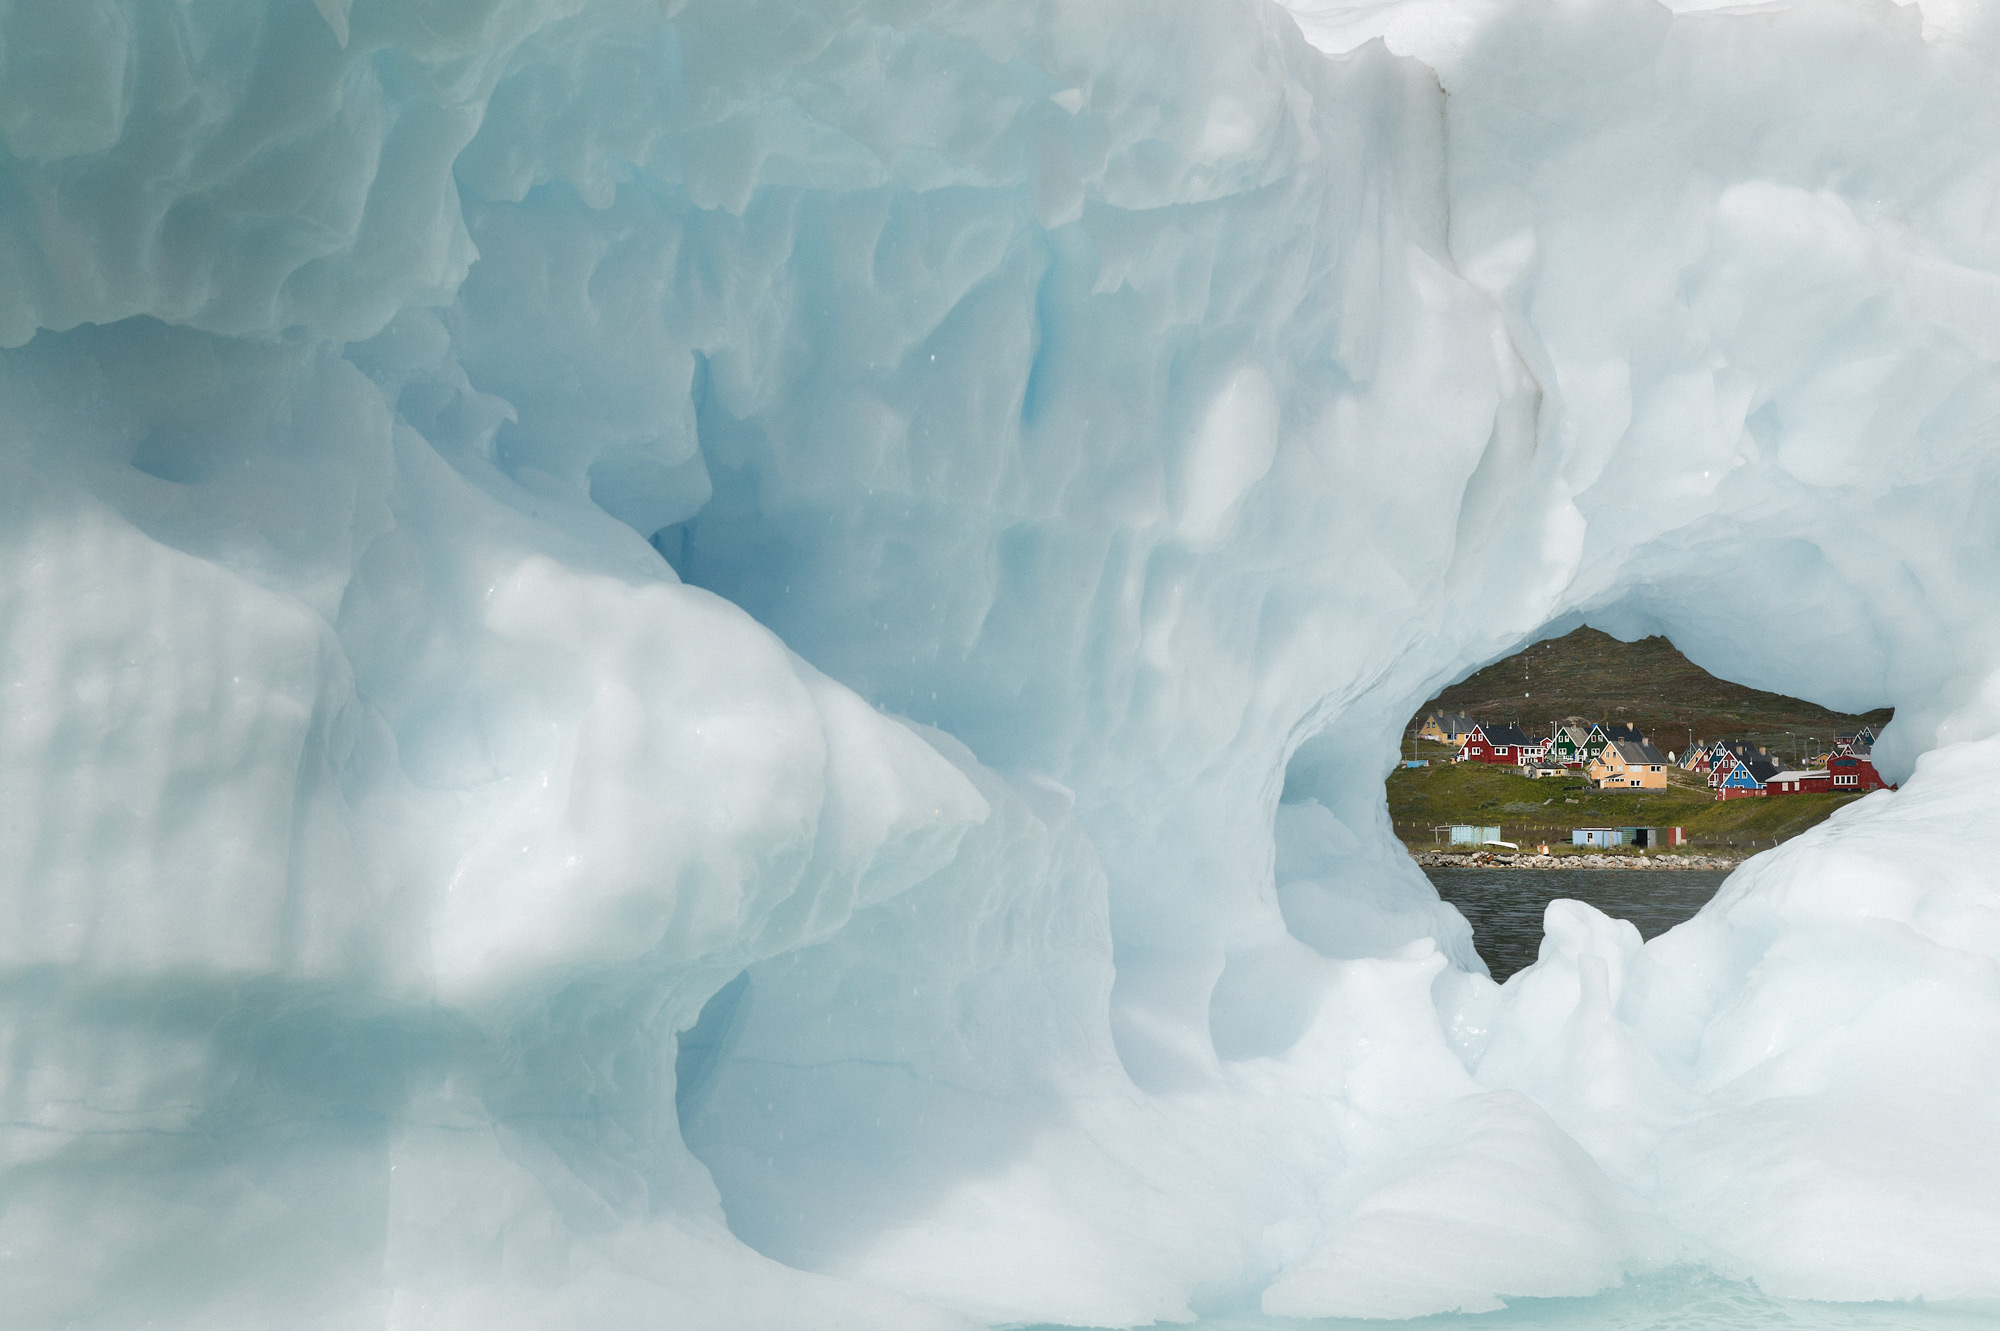 A hole in an iceberg reveals Greenlandic town